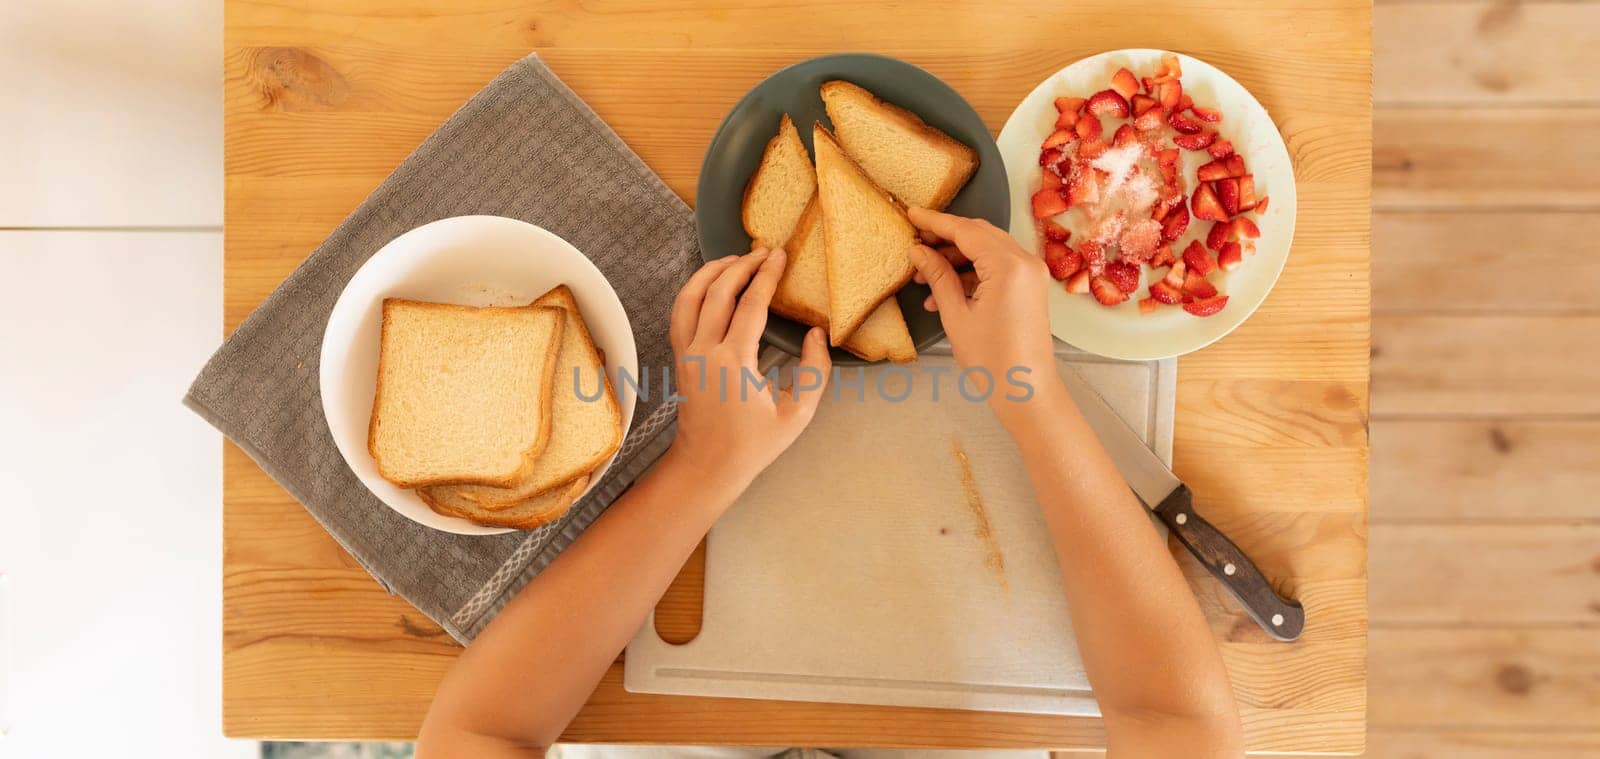 Top view, a woman making cream cheese toast with strawberries for a snack.